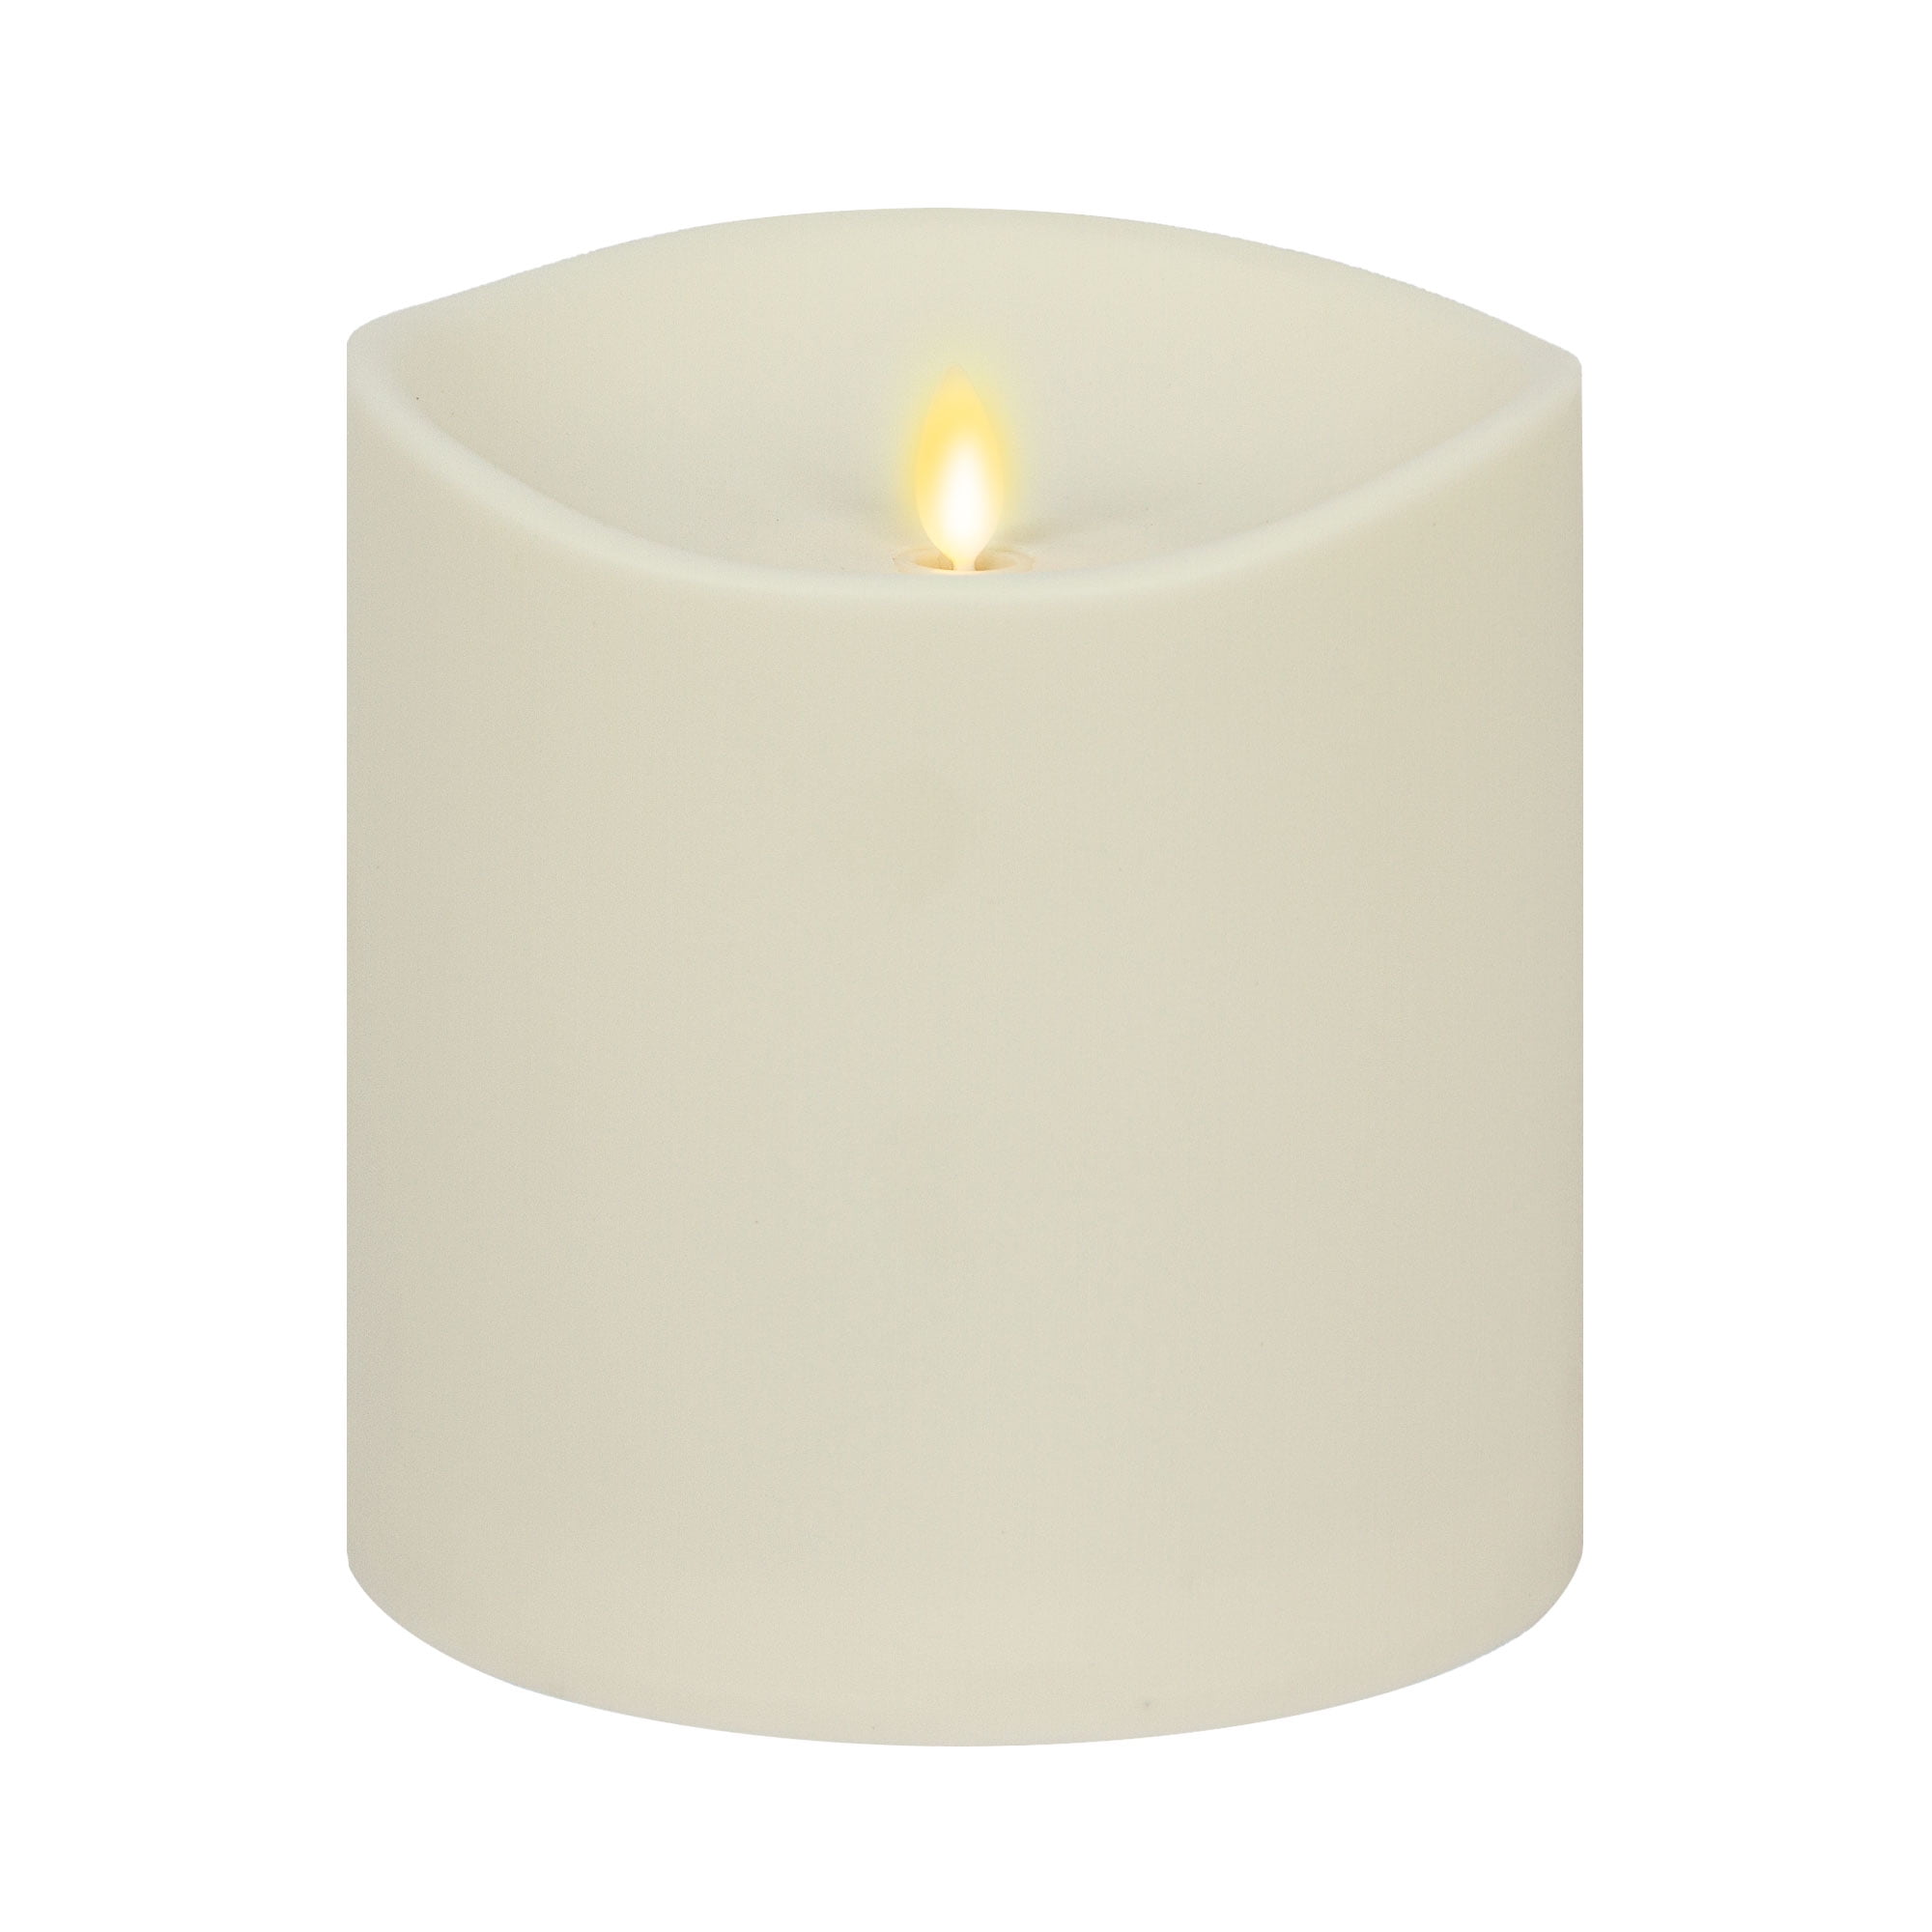 Luminara Flameless Candles Wax Candle 5-Inch Ivory with Timer Remote Included 